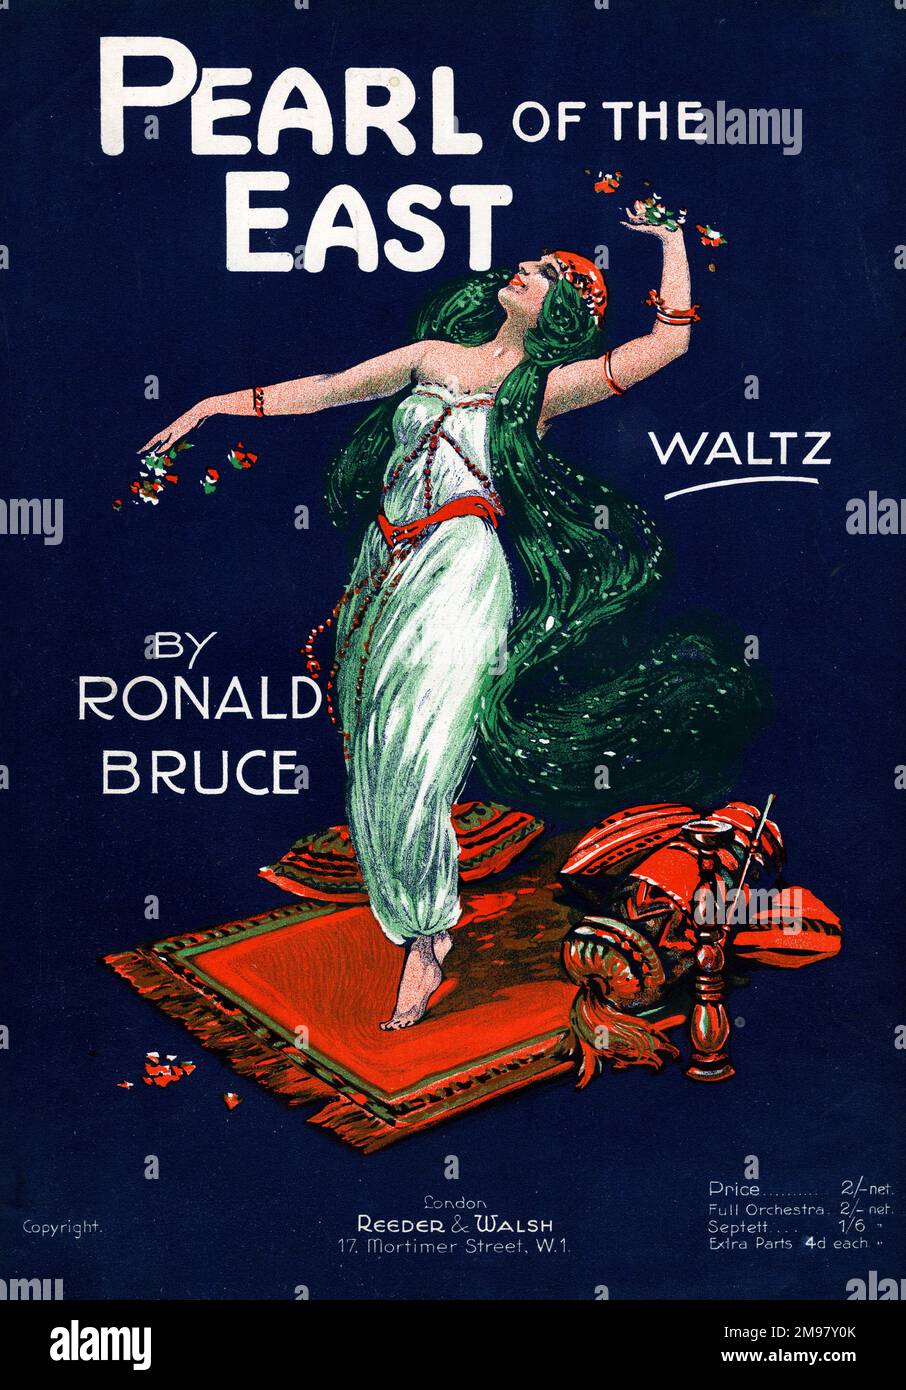 Music cover, Pearl of the East Waltz, by Ronald Bruce. Stock Photo